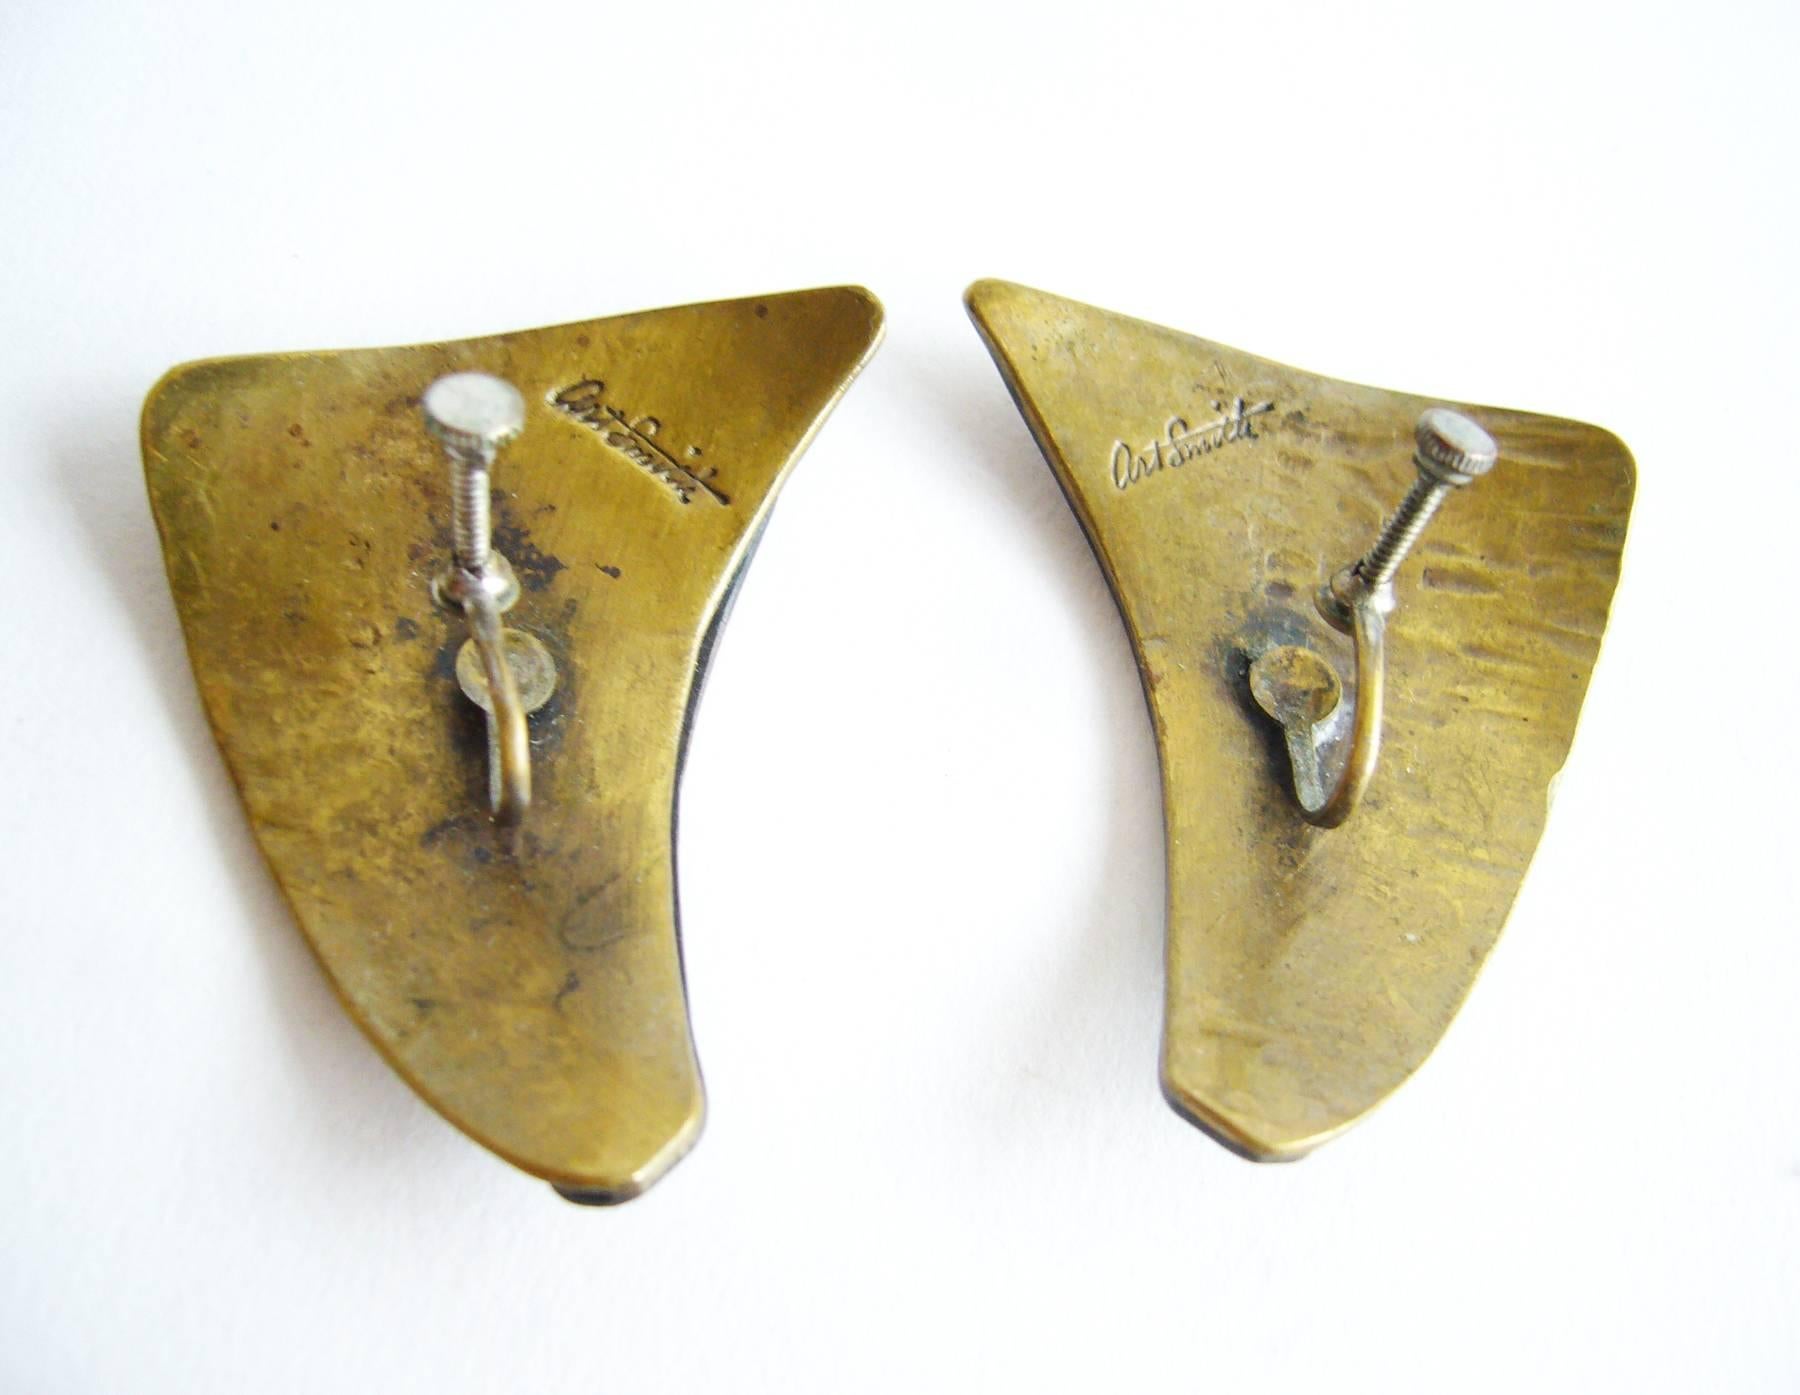 Pair of patinated copper and textured brass screwback earrings created by Art Smith of New York, New York.  Earrings measure 2